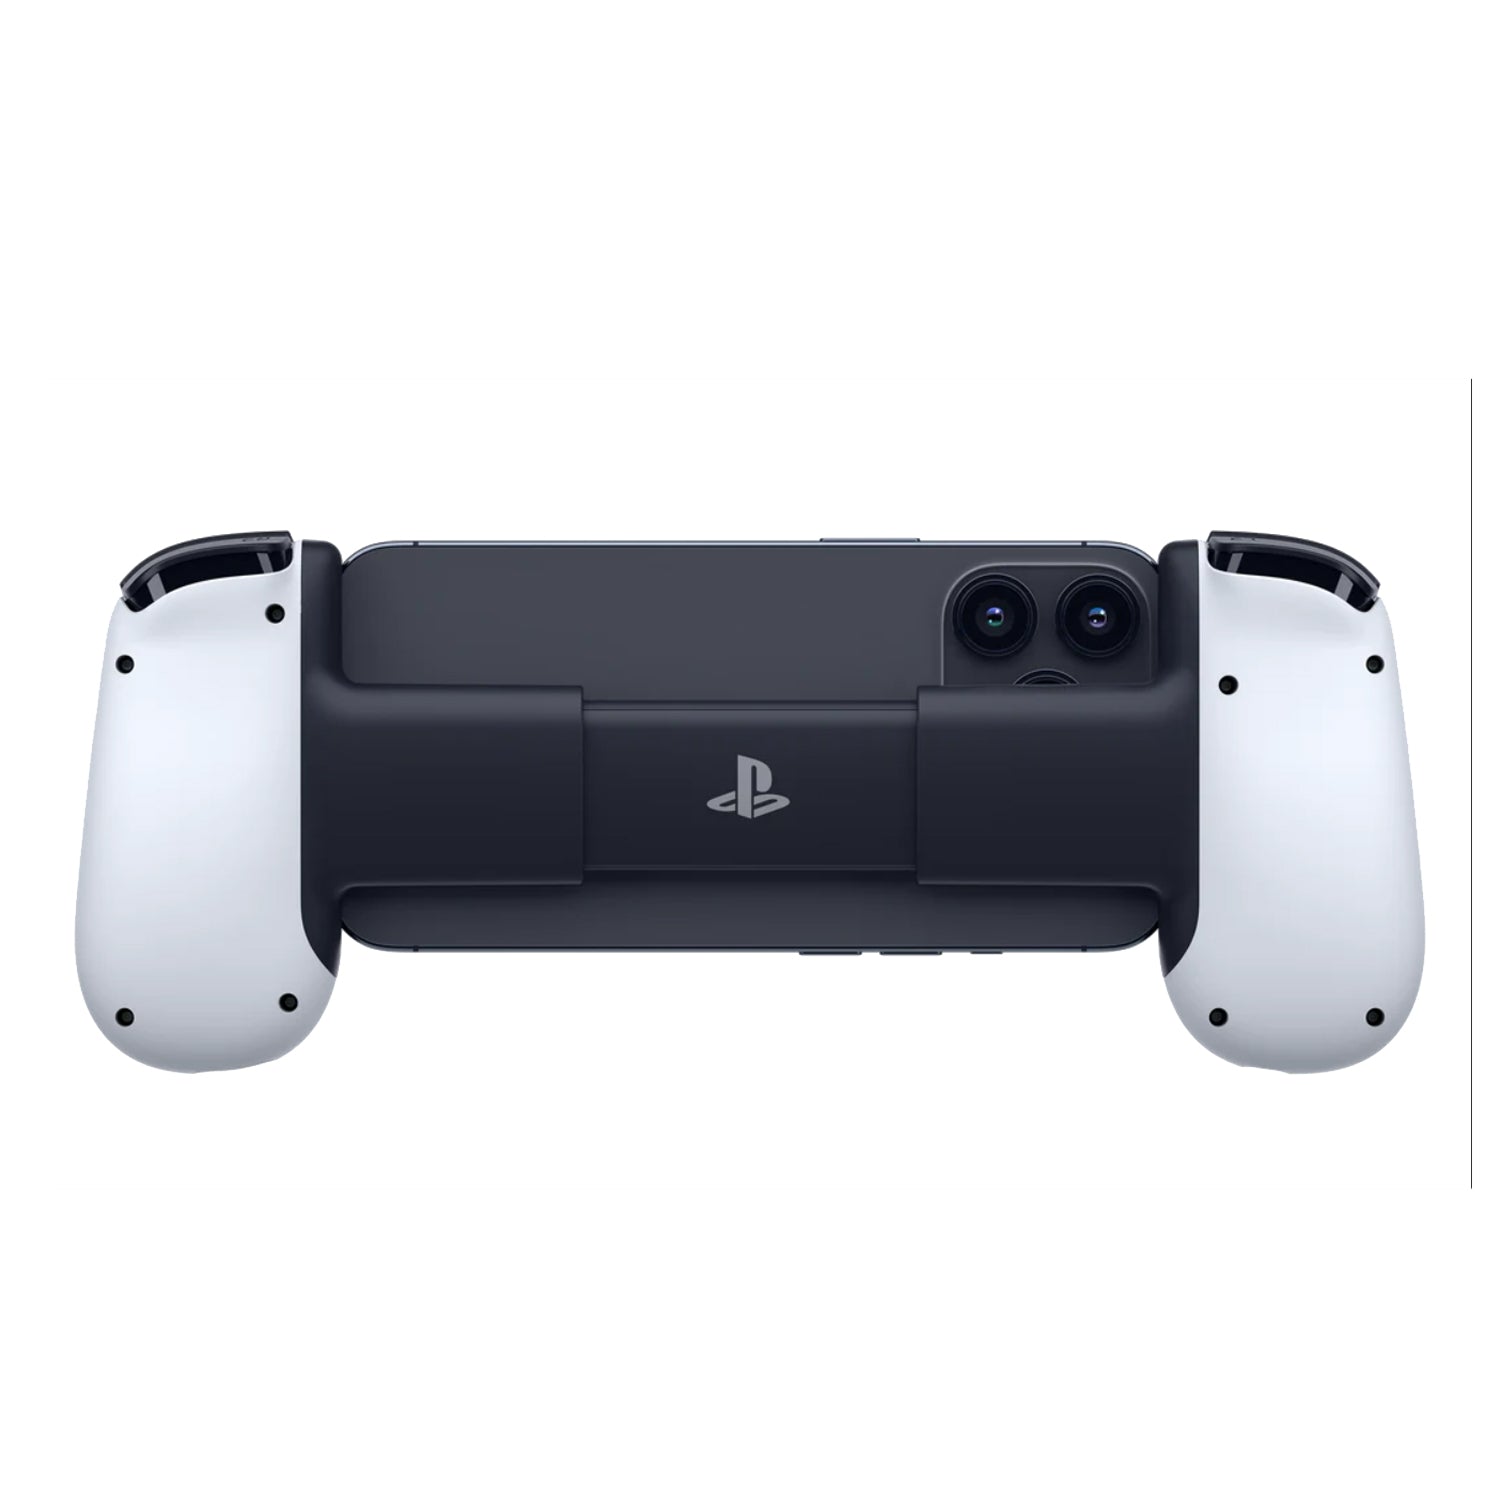 Backbone One Controller PlayStation Edition for iPhone / Android (Gen 1 & Gen 2)